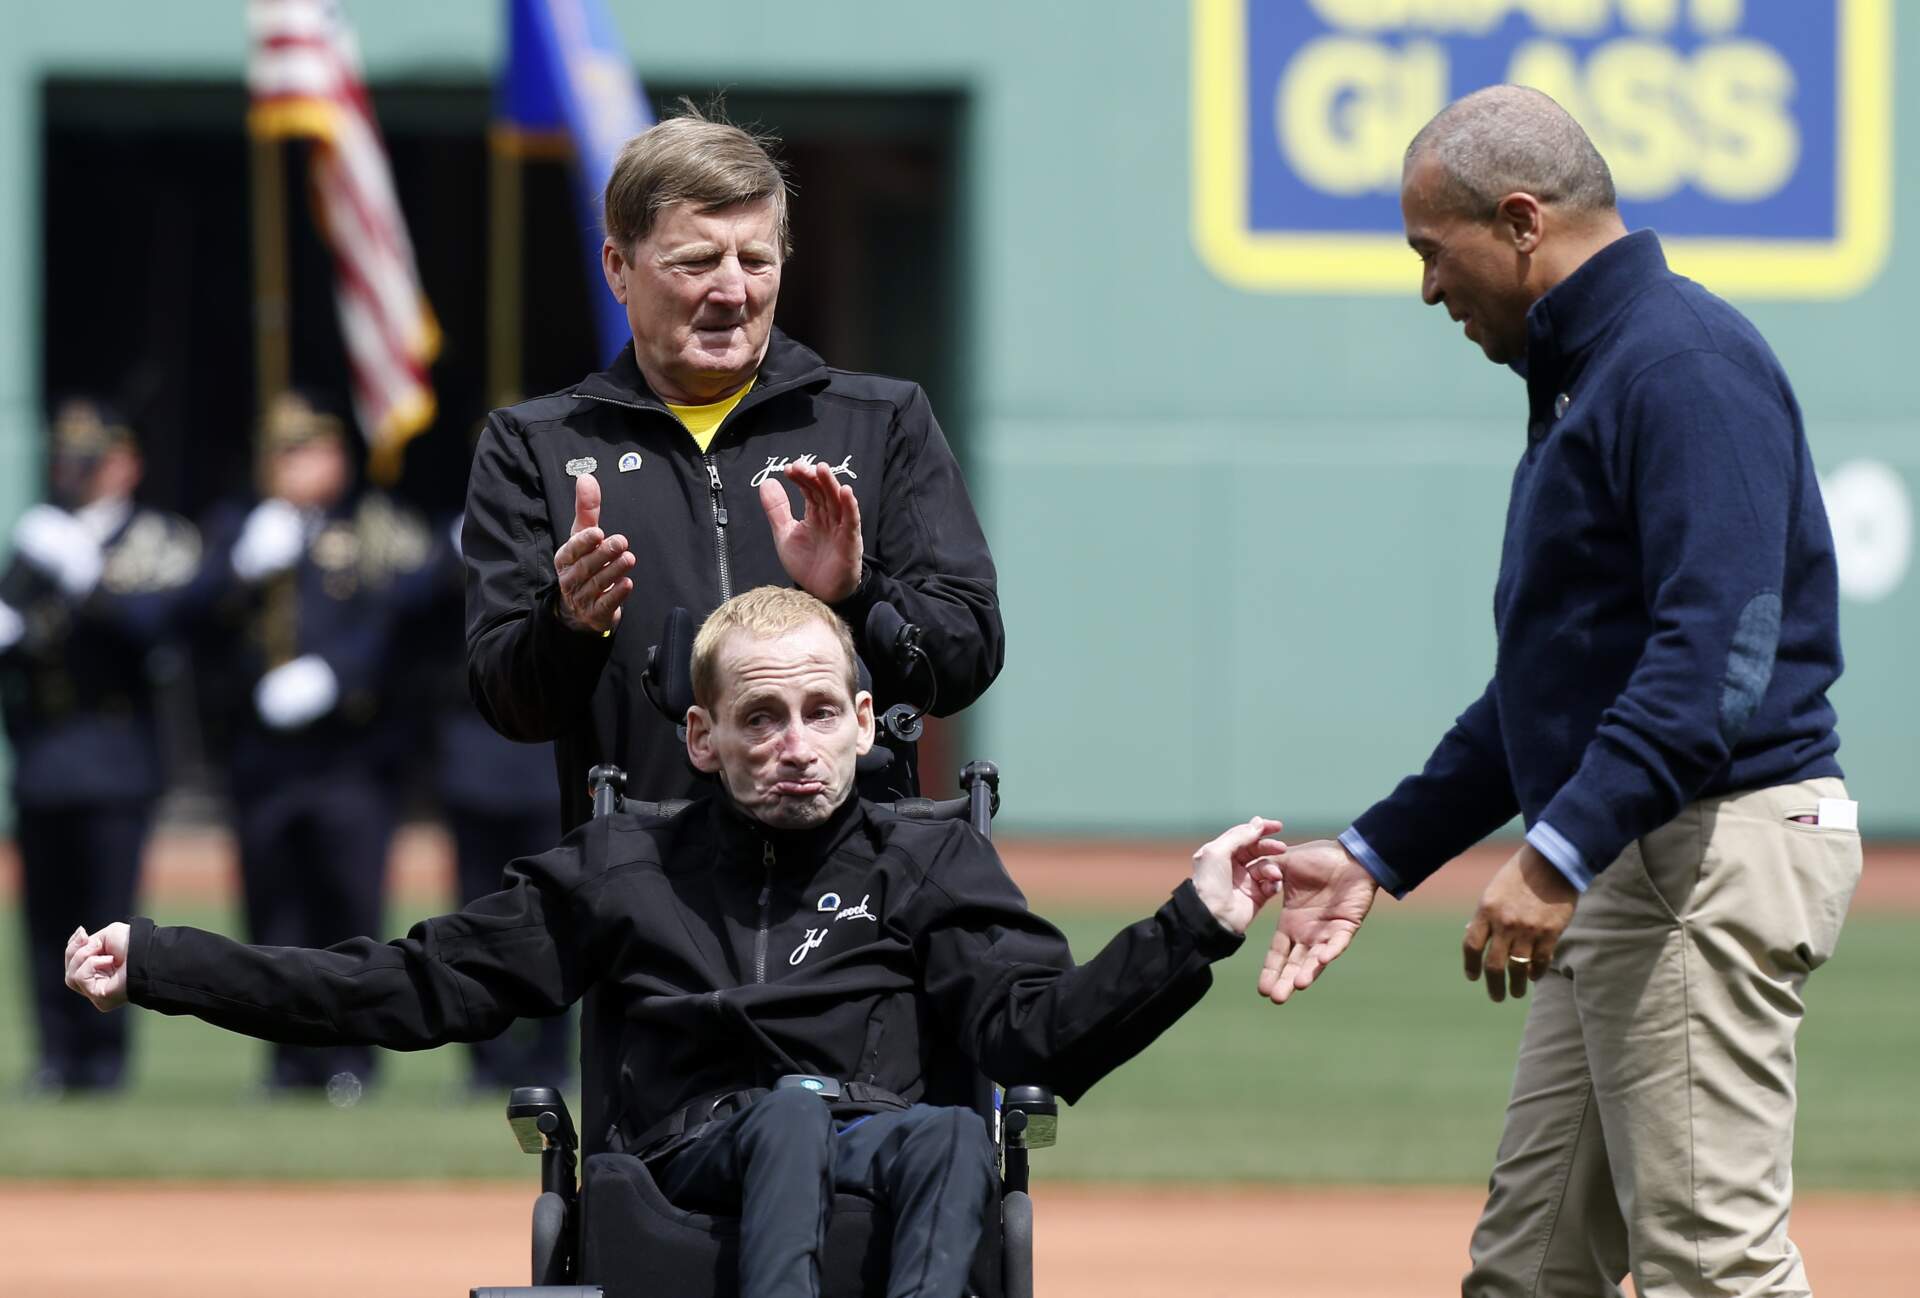 Massachusetts Gov. Deval Patrick, right, greets marathoners Rick Hoyt and his father Dick before the ceremonial first pitch in a baseball game between the Boston Red Sox and the Kansas City Royals at Fenway Park in 2013. (Michael Dwyer/AP)